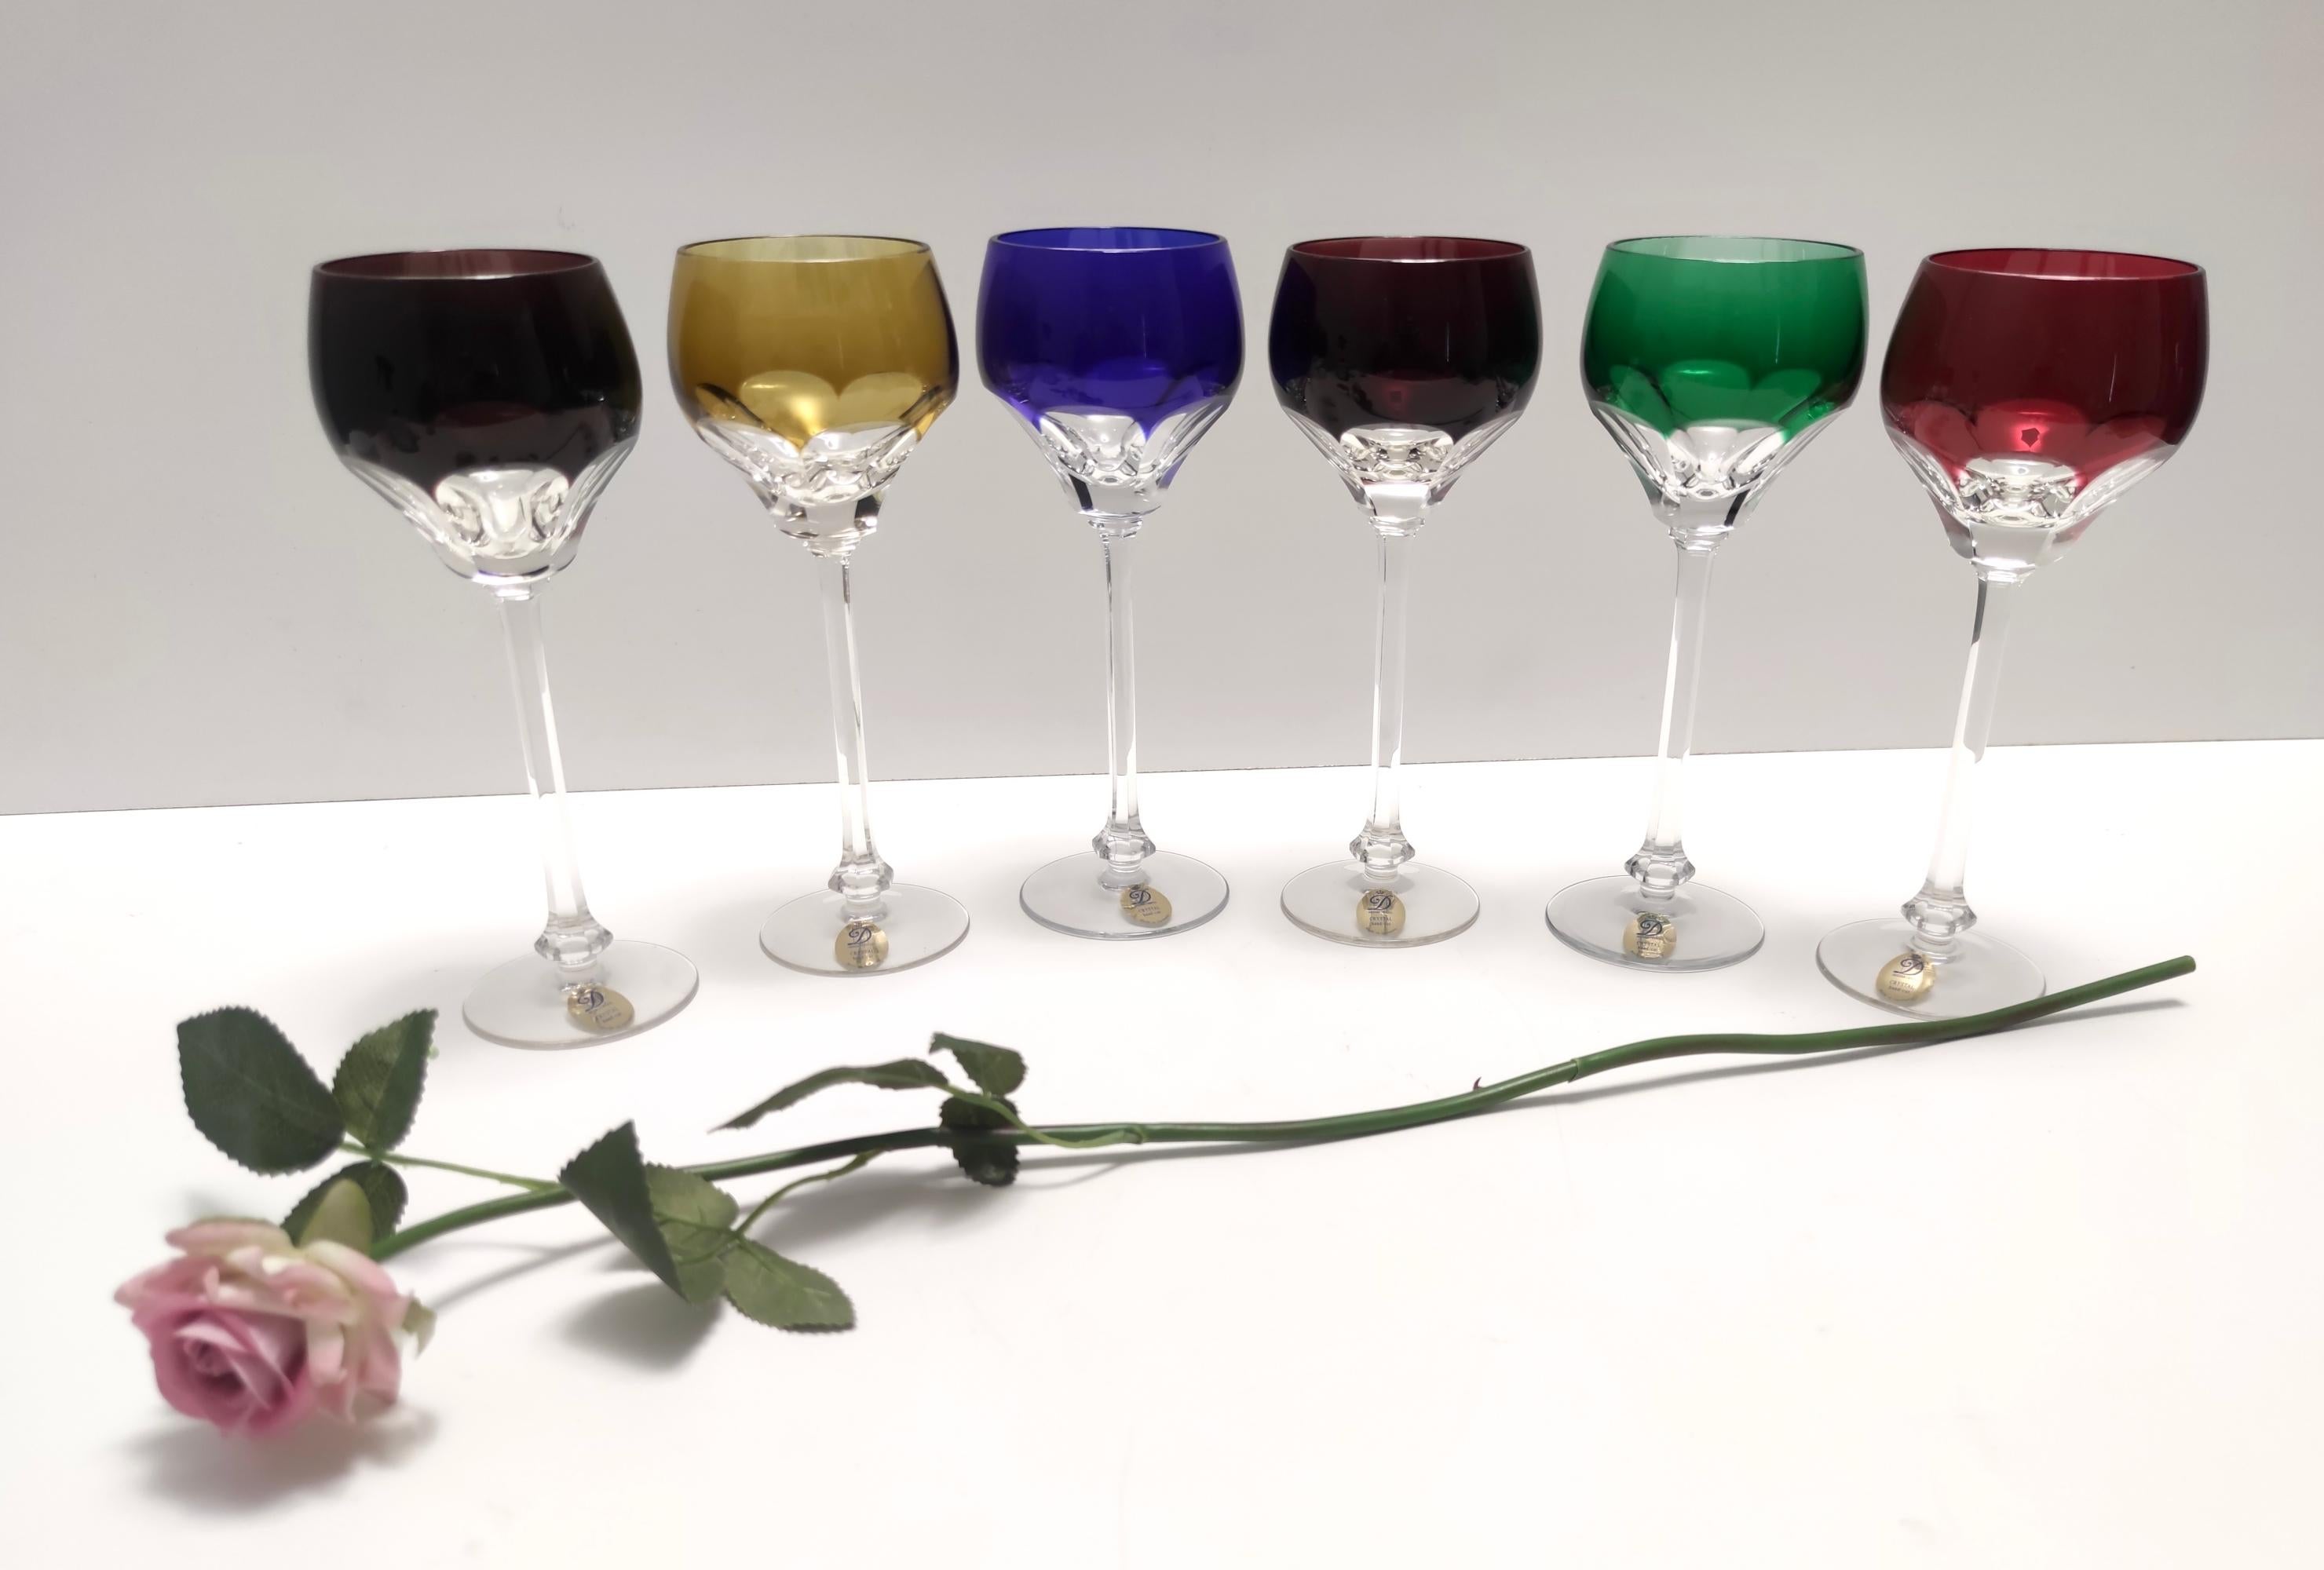 Made in Dresden, Germany, in 1960s - 1970s.
This set of six glasses is made in fine Bohemia crystal.
It is a vintage set, therefore it might show slight traces of use, but it can be considered as in excellent original condition and ready to become a